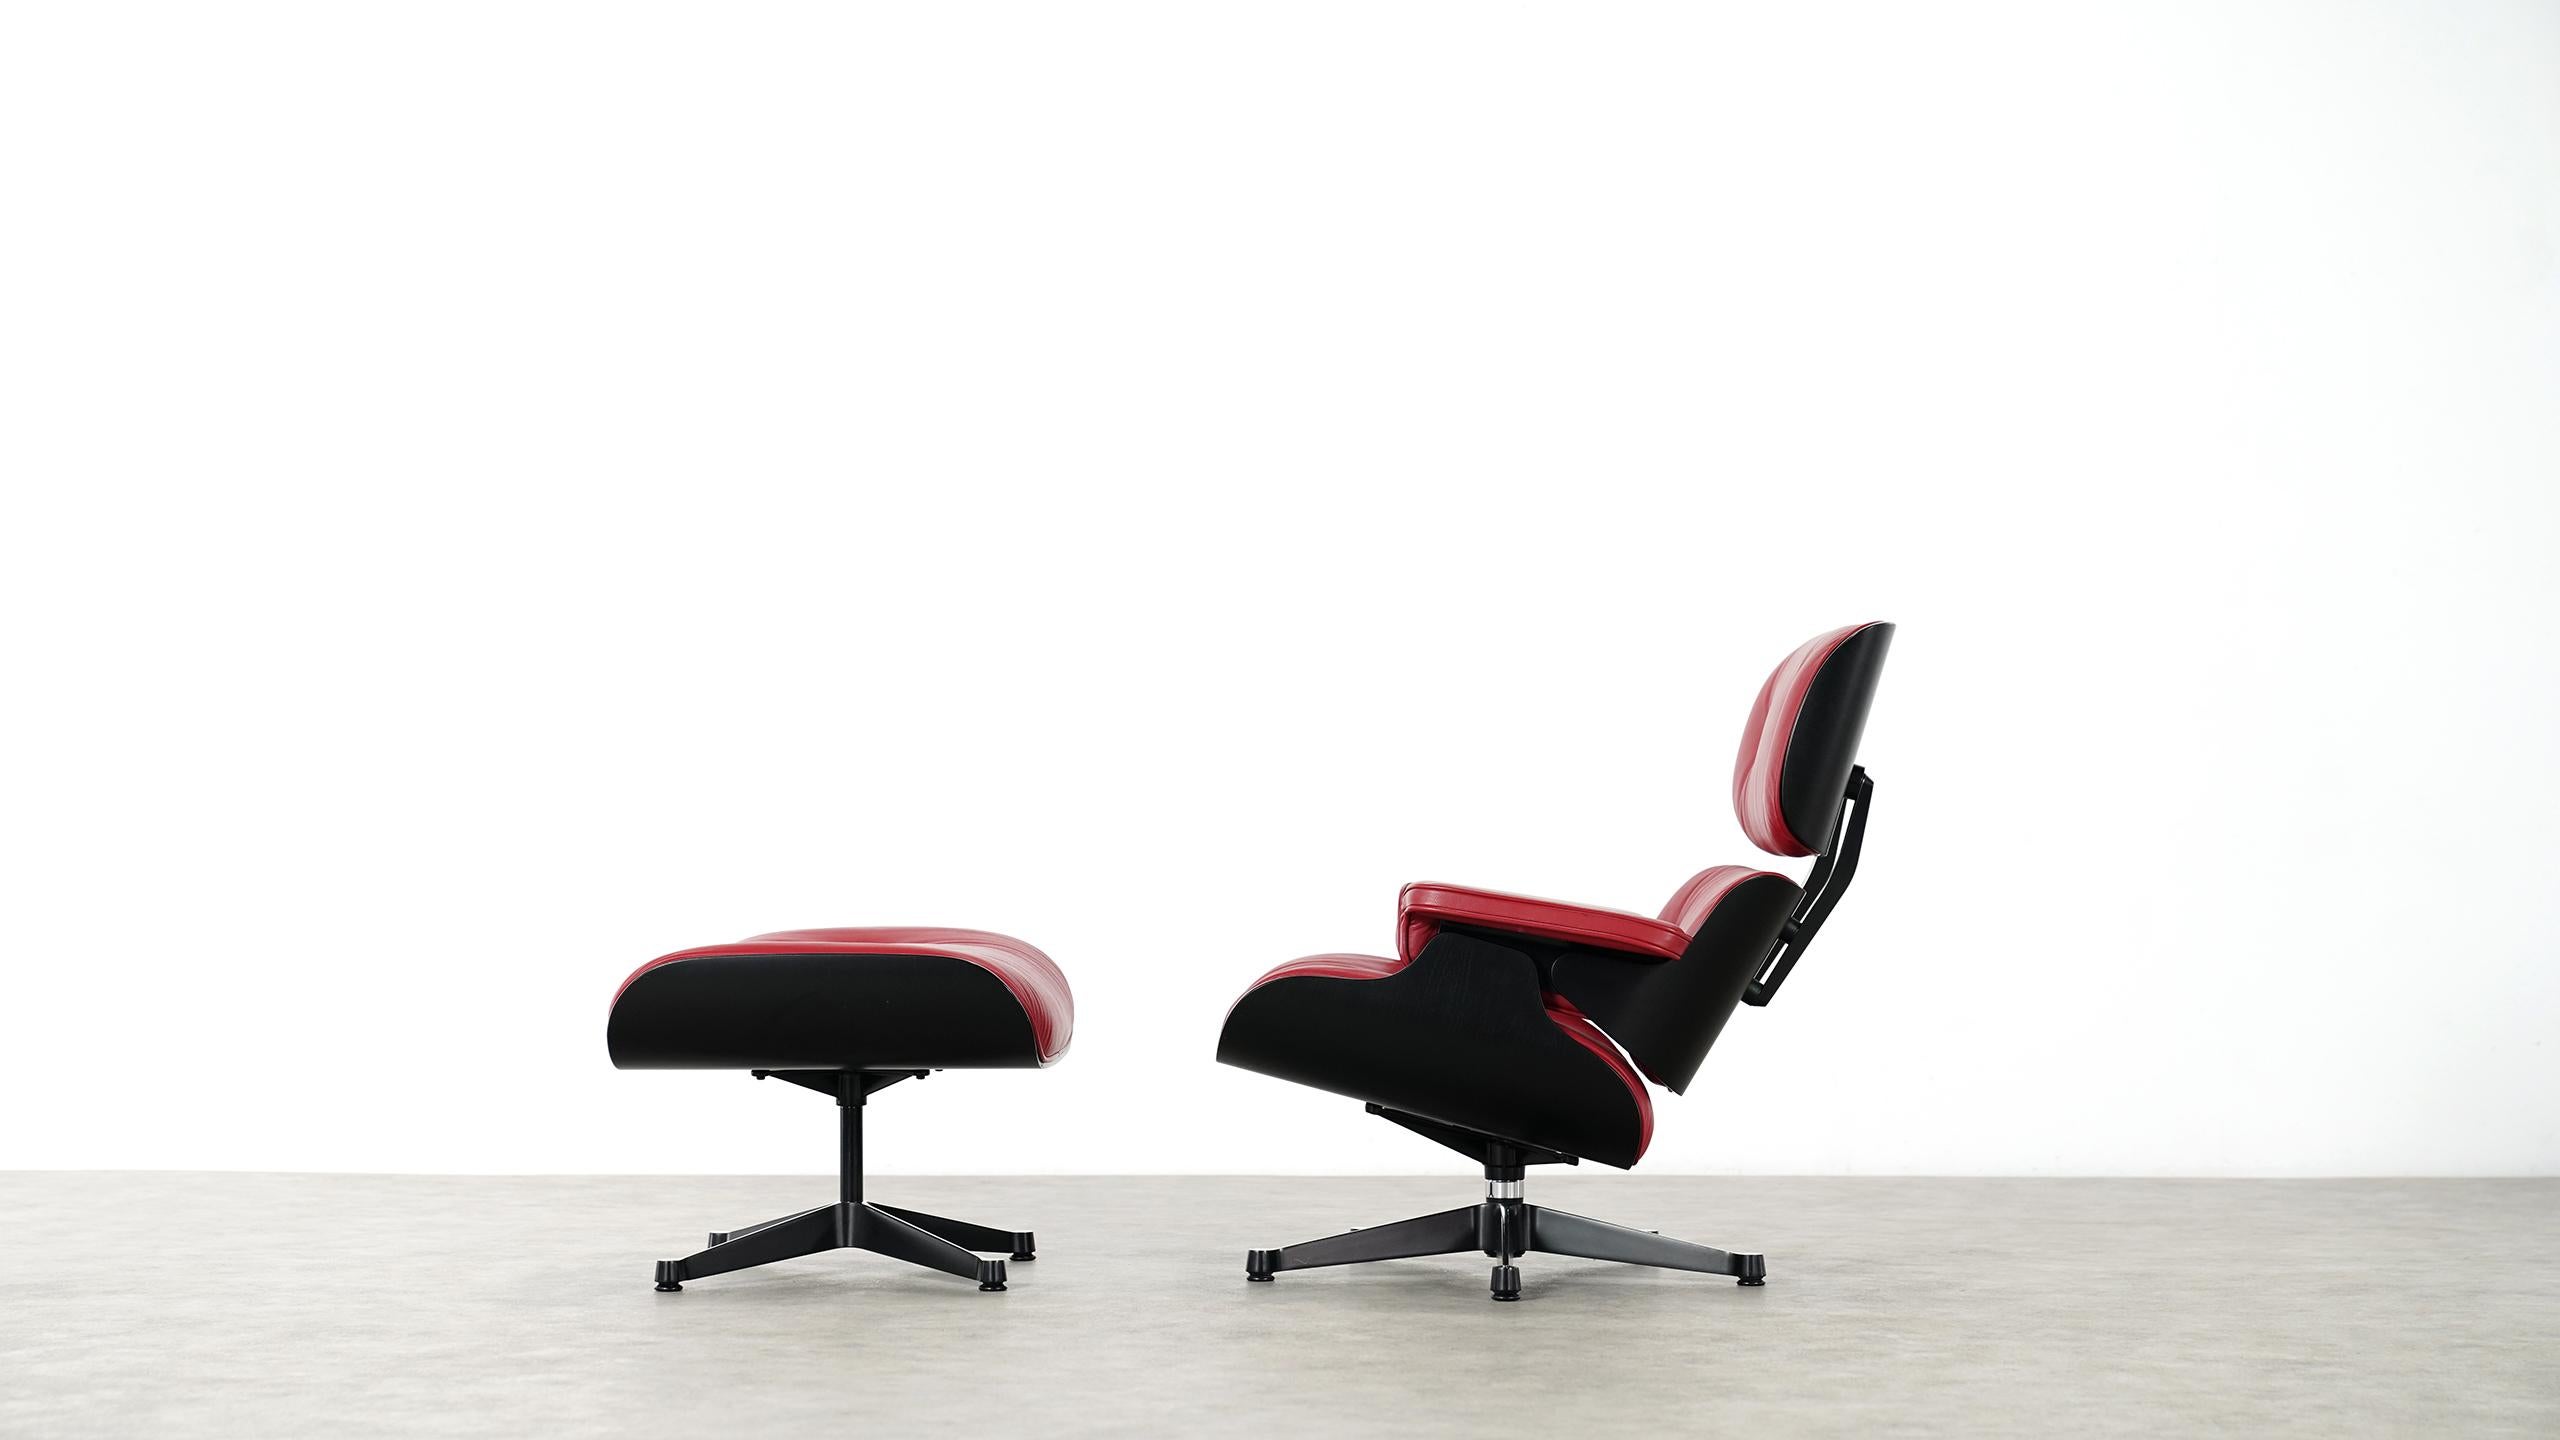 Stunning and beautiful Charles Eames lounge chair and ottoman by Vitra.
With smoothened black shells, so the wood grain is perceptible and very soft red leather pads.

Very nice condition!

Both, chair and ottoman have their original